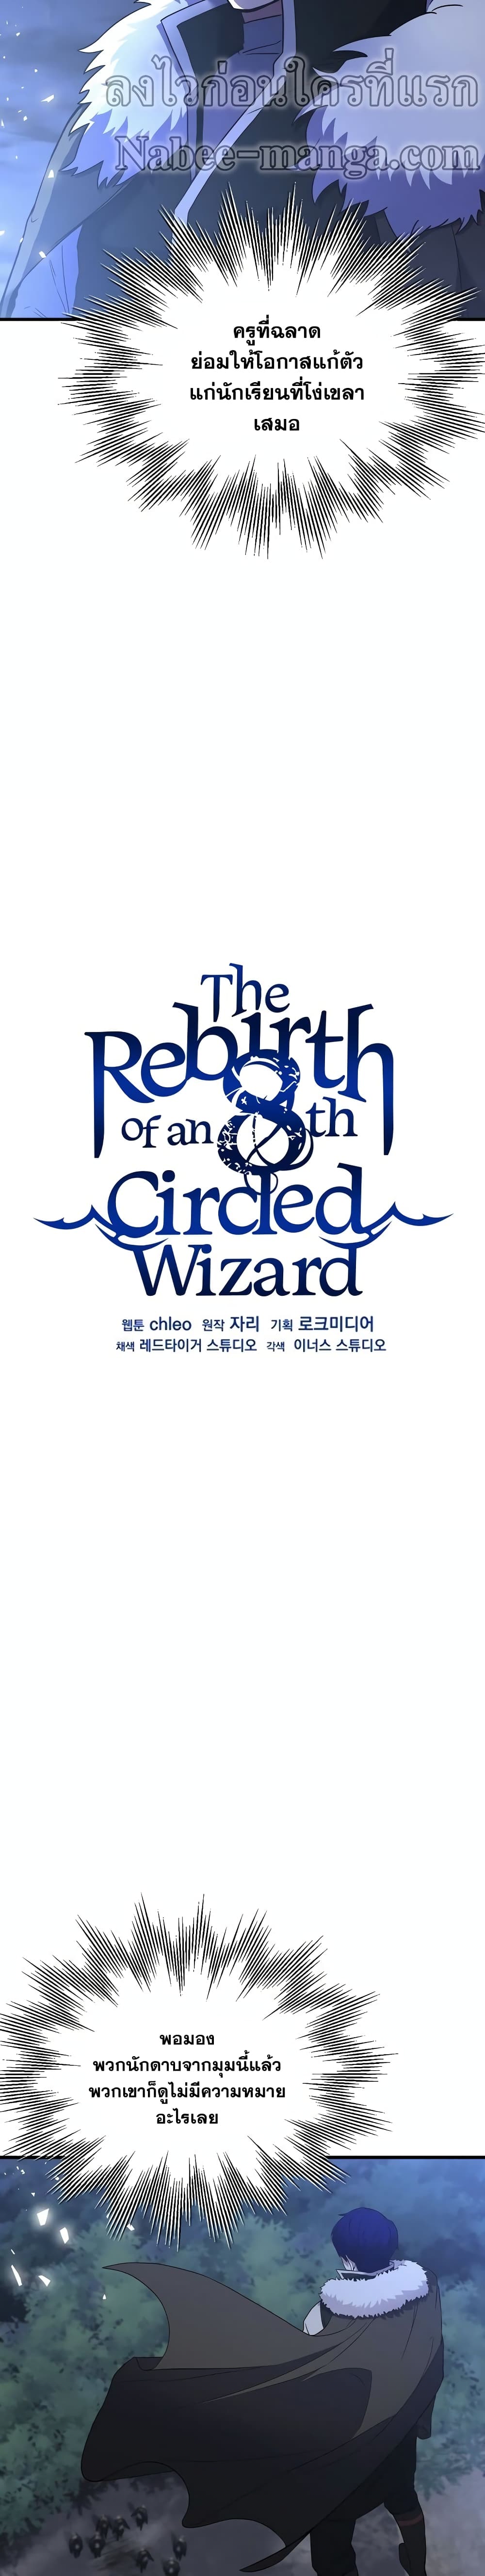 The Rebirth of an 8th Circled Wizard 78-78